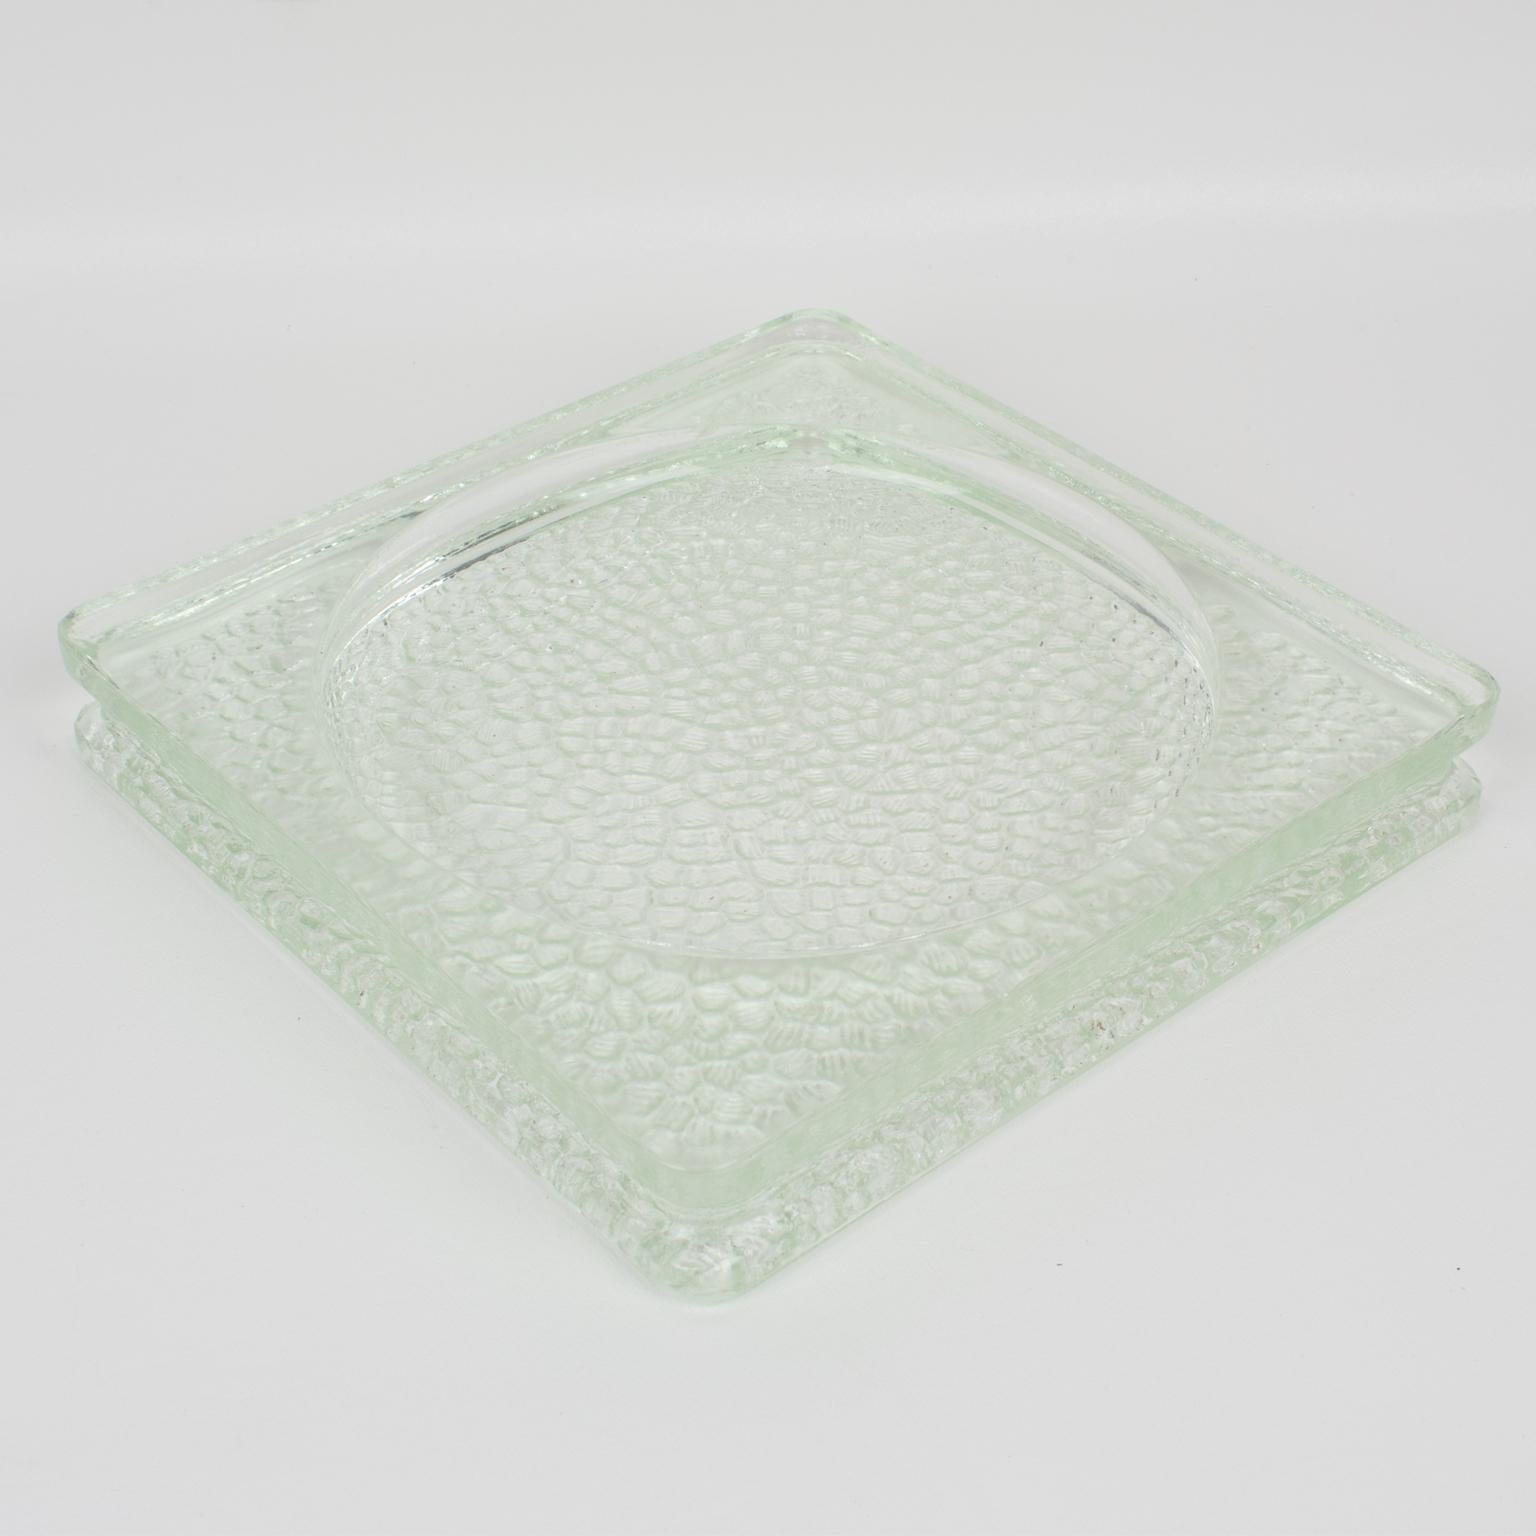 Lovely 1950s Industrial thick molded glass desktop accessory catchall, desk tidy, or ashtray manufactured by Lumax, France. Original design by Le Corbusier, this model named 